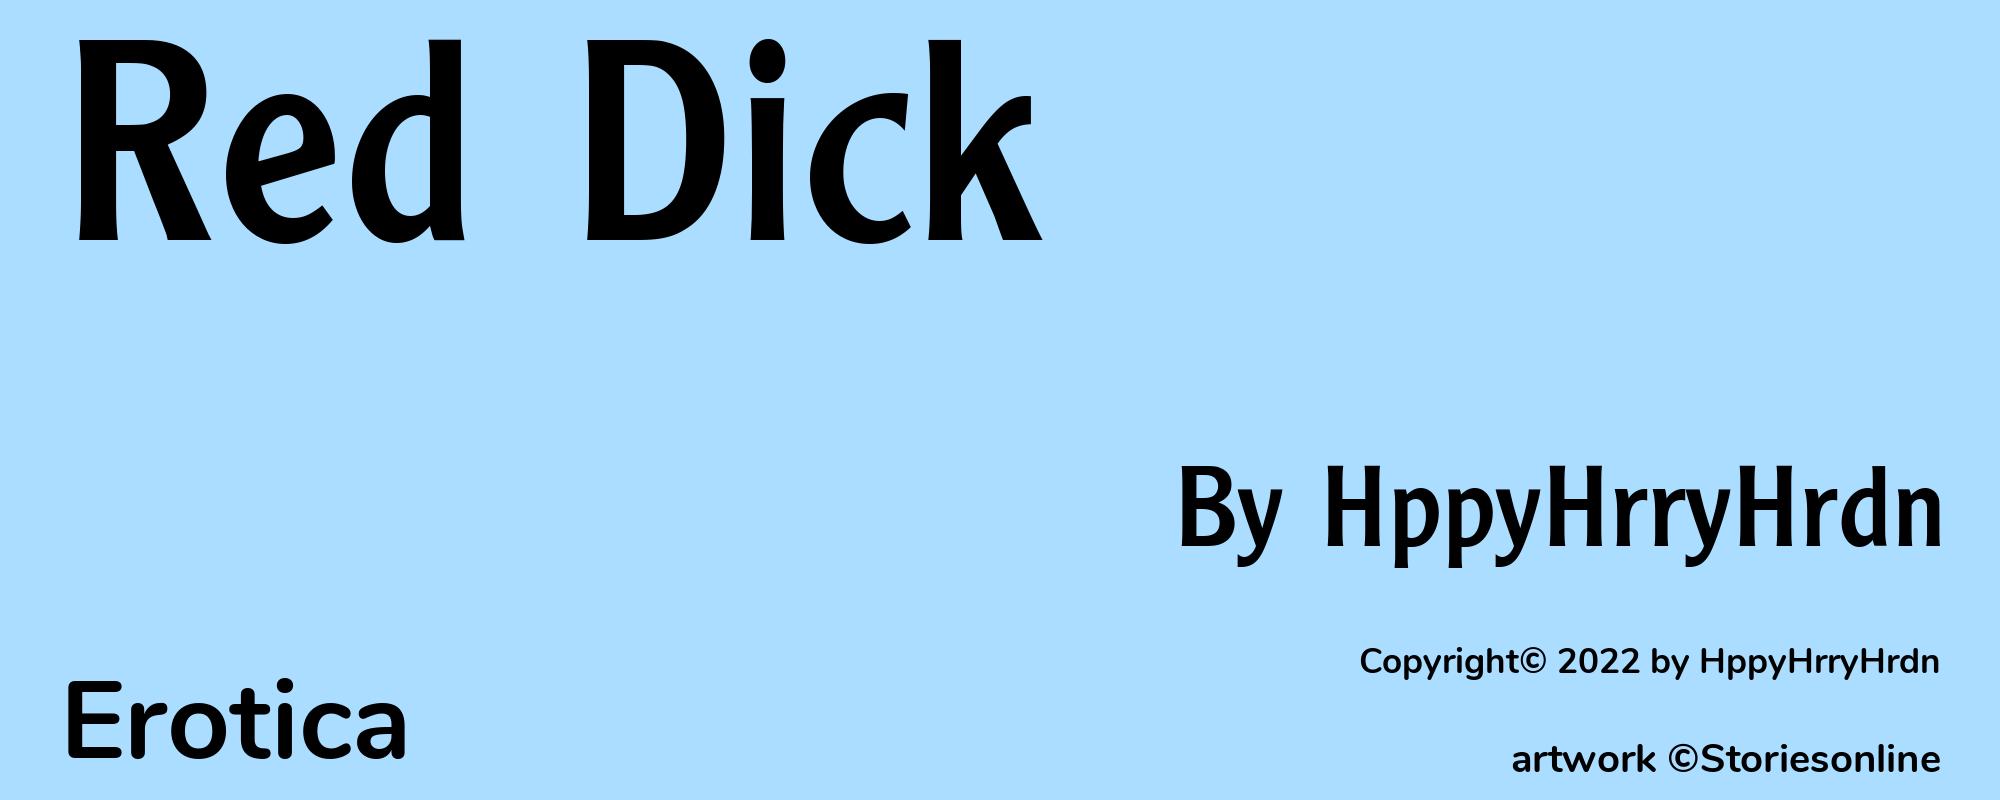 Red Dick - Cover